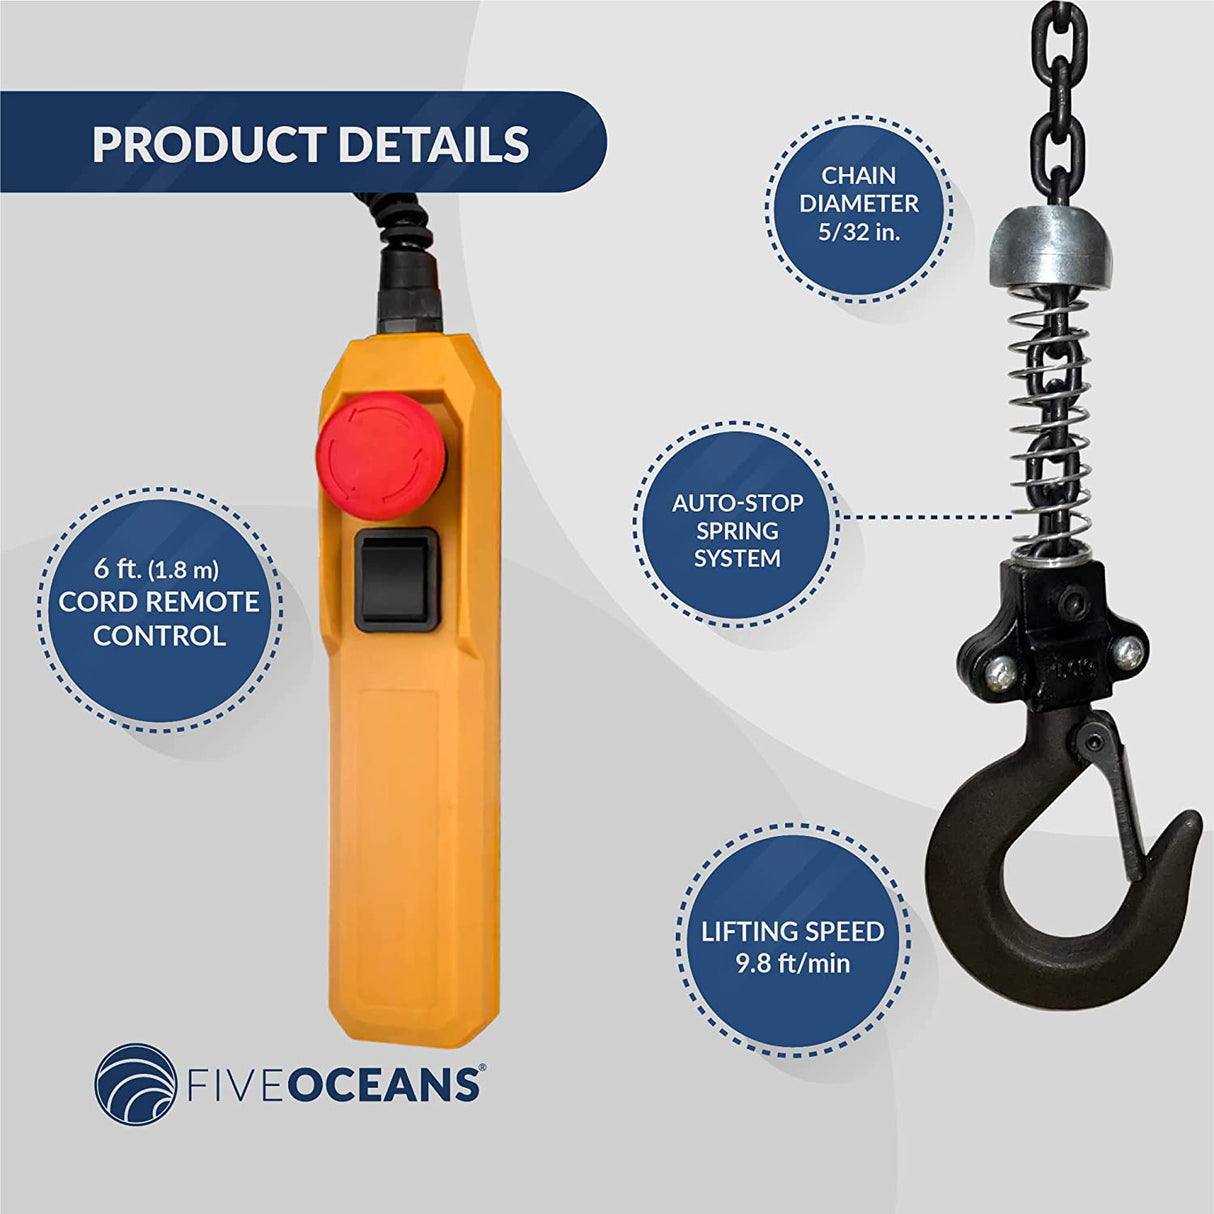 150kg / 330lbs  Overhead Electric Chain Hoist w/ 10ft Chain | Single phase 120V  - FIVE OCEANS